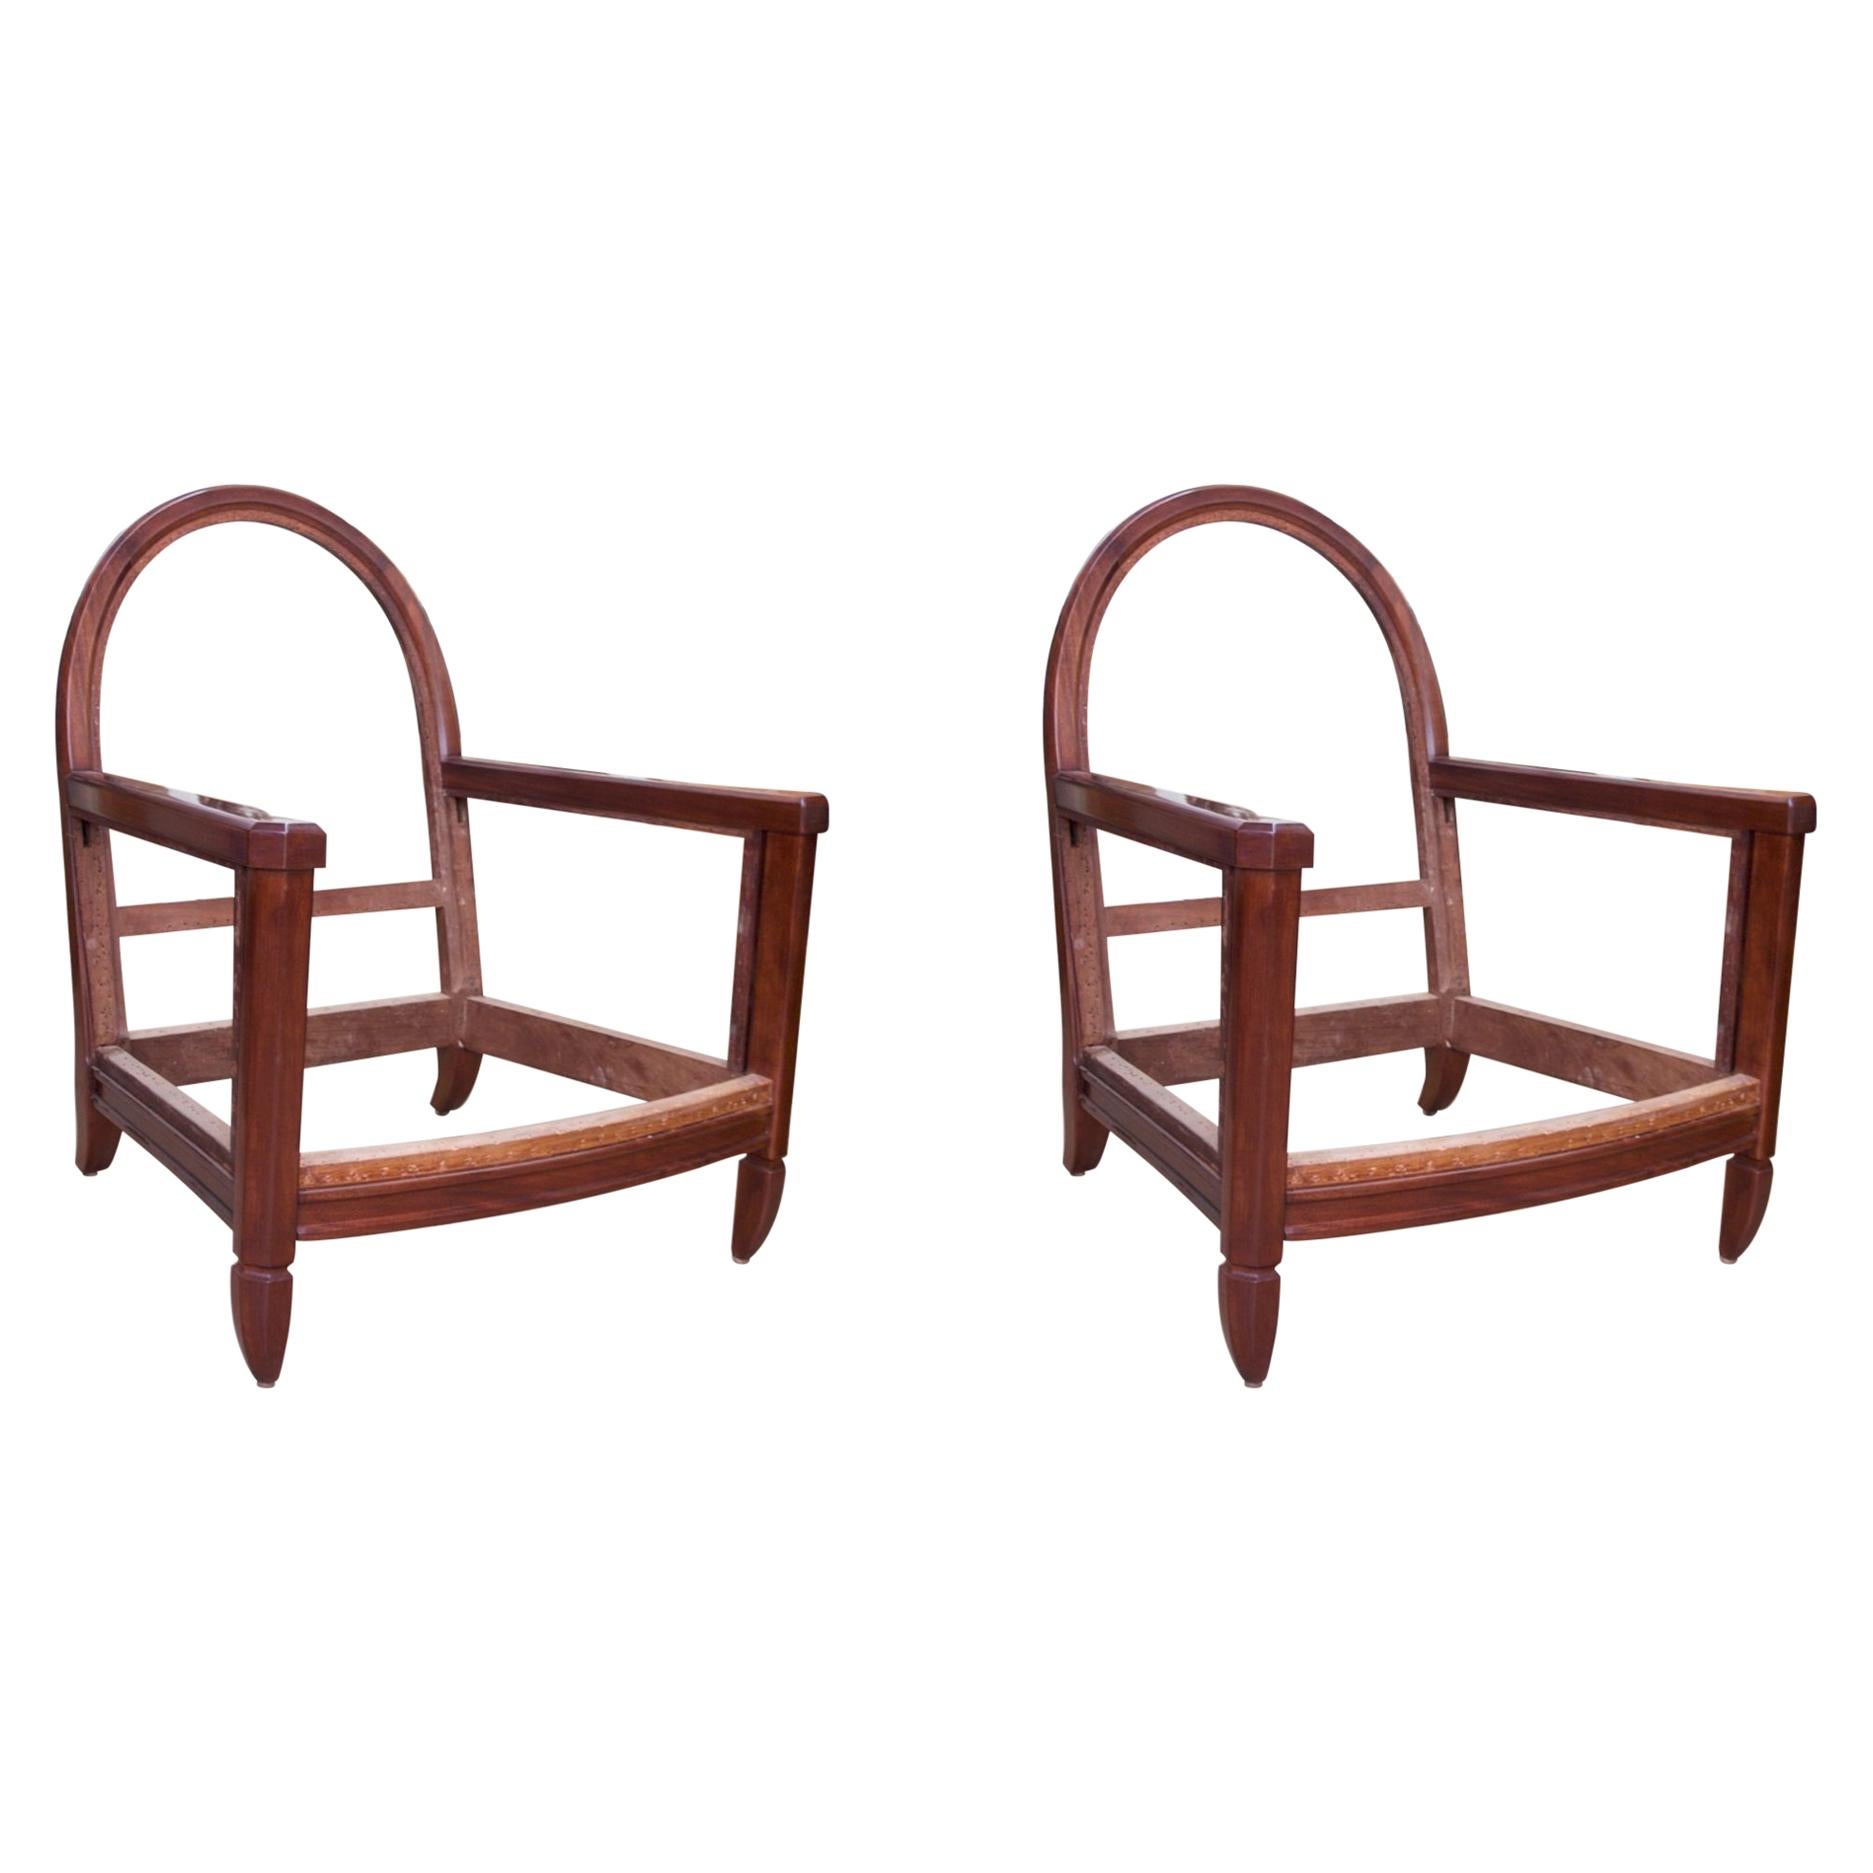 Andre Groult Pair of Club Chairs For Sale